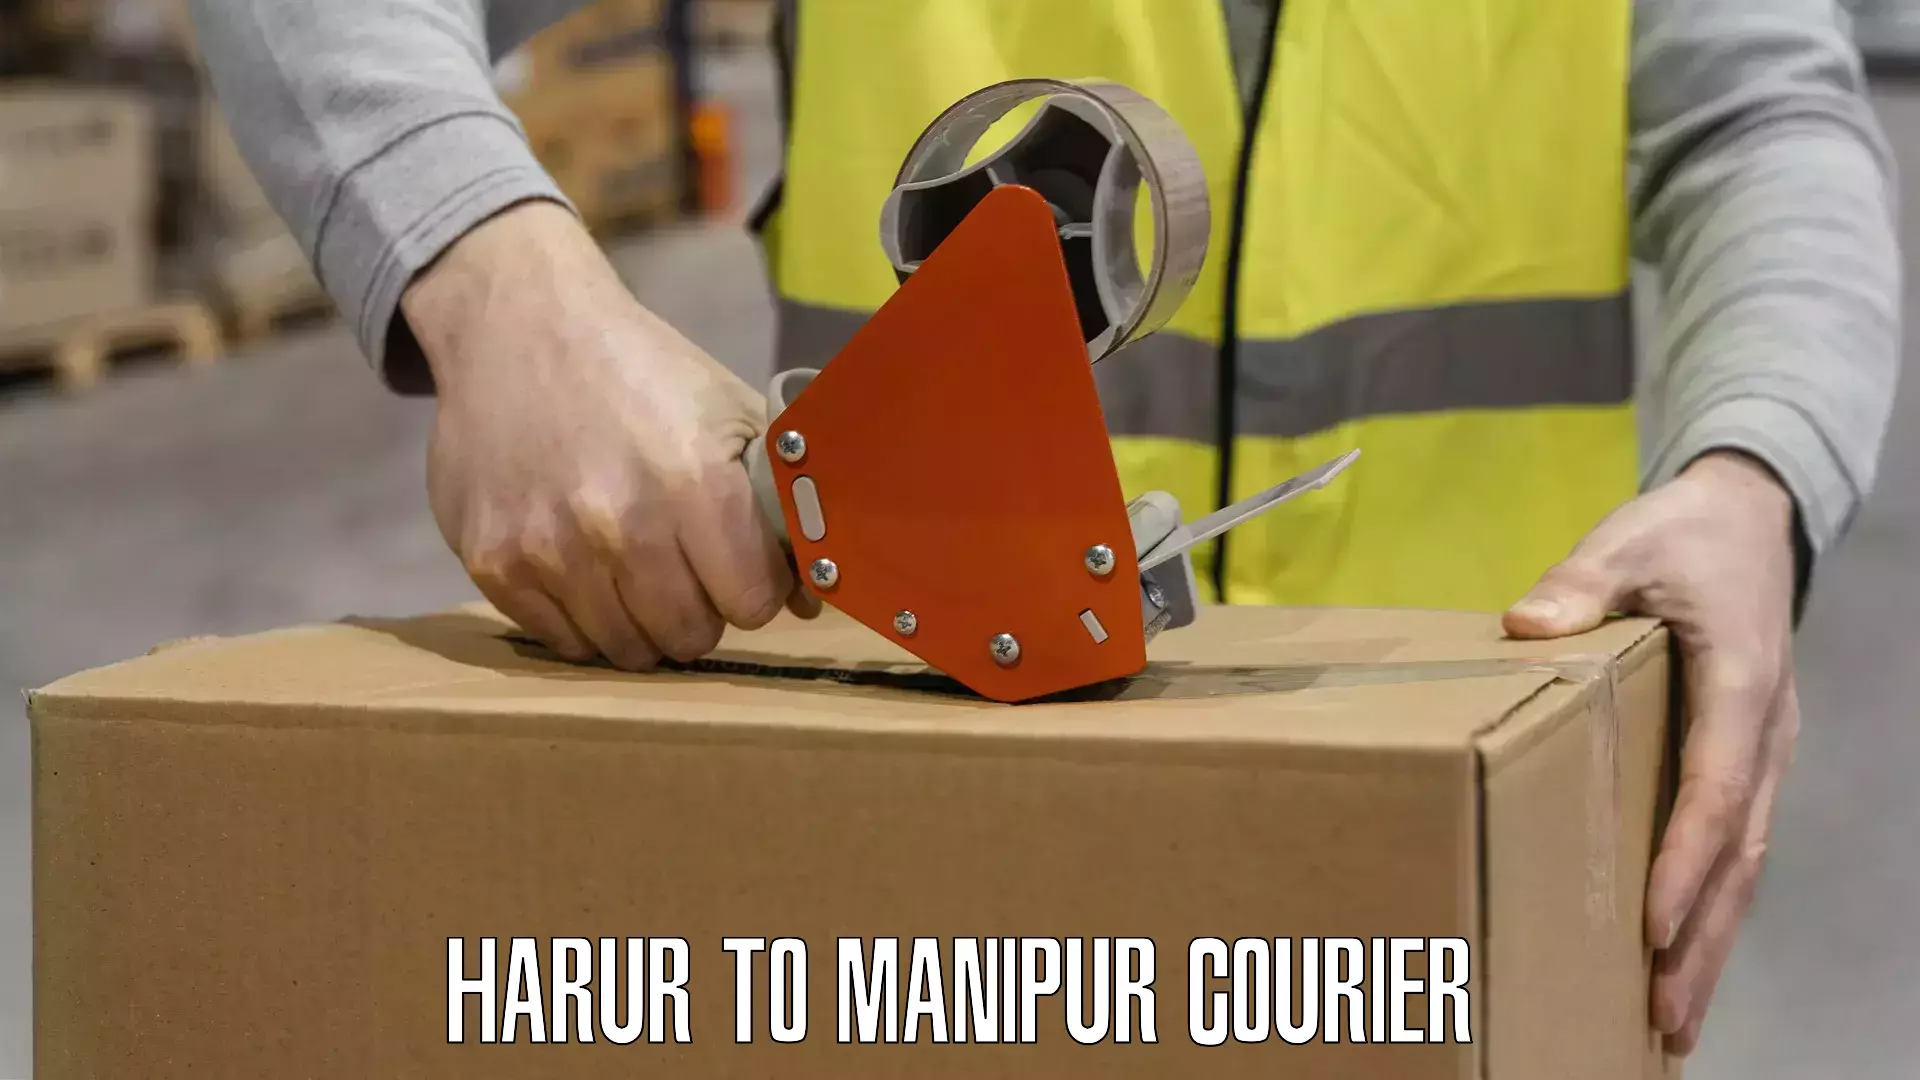 Efficient courier operations Harur to Manipur